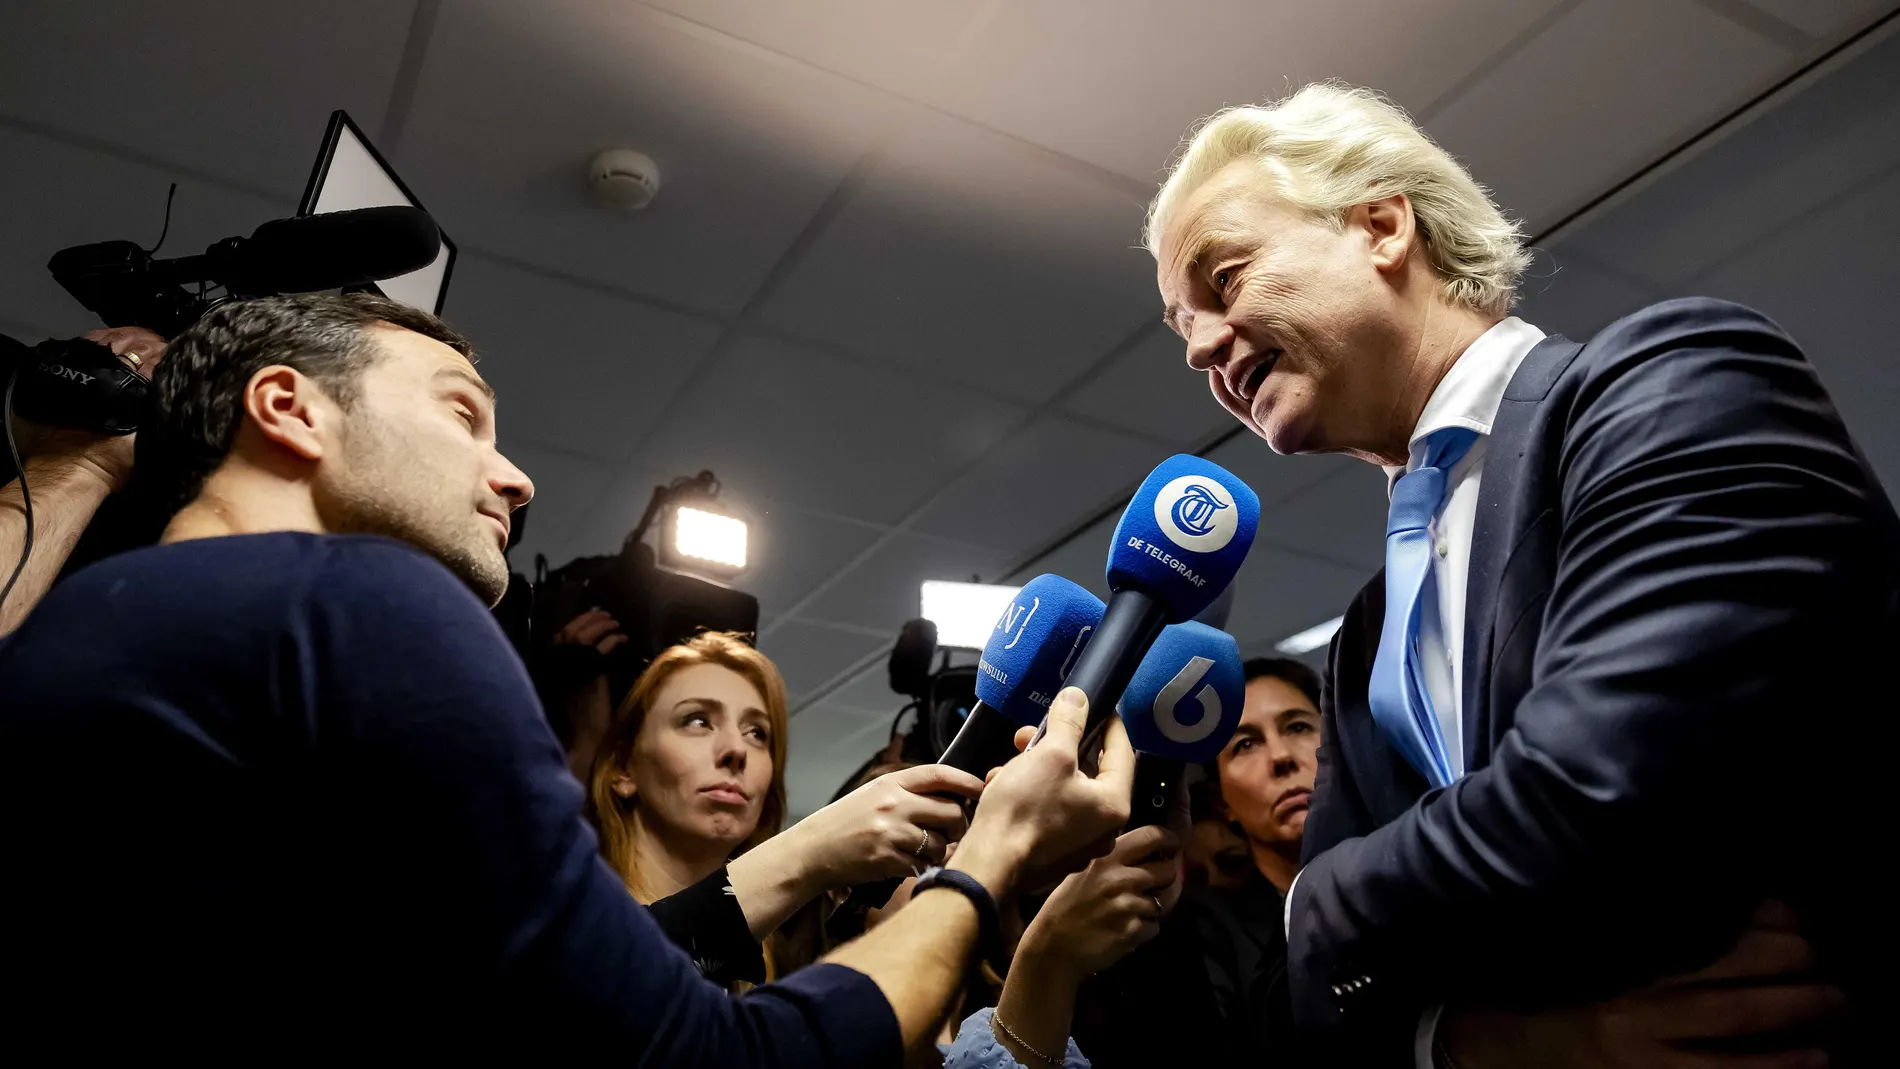 Den Haag (Netherlands), 27/11/2023.- Far-right PVV leader Geert Wilders speaks to the press in The Hague, The Netherlands, 27 November 2023, about the immediate departure of his 'coalition scout' Gom van Strien. The PVV senator van Strien is associated with fraud following accusations by his former employer Utrecht Holdings of fraud and bribery. (Elecciones, Países Bajos; Holanda, La Haya) EFE/EPA/Robin van Lonkhuijsen